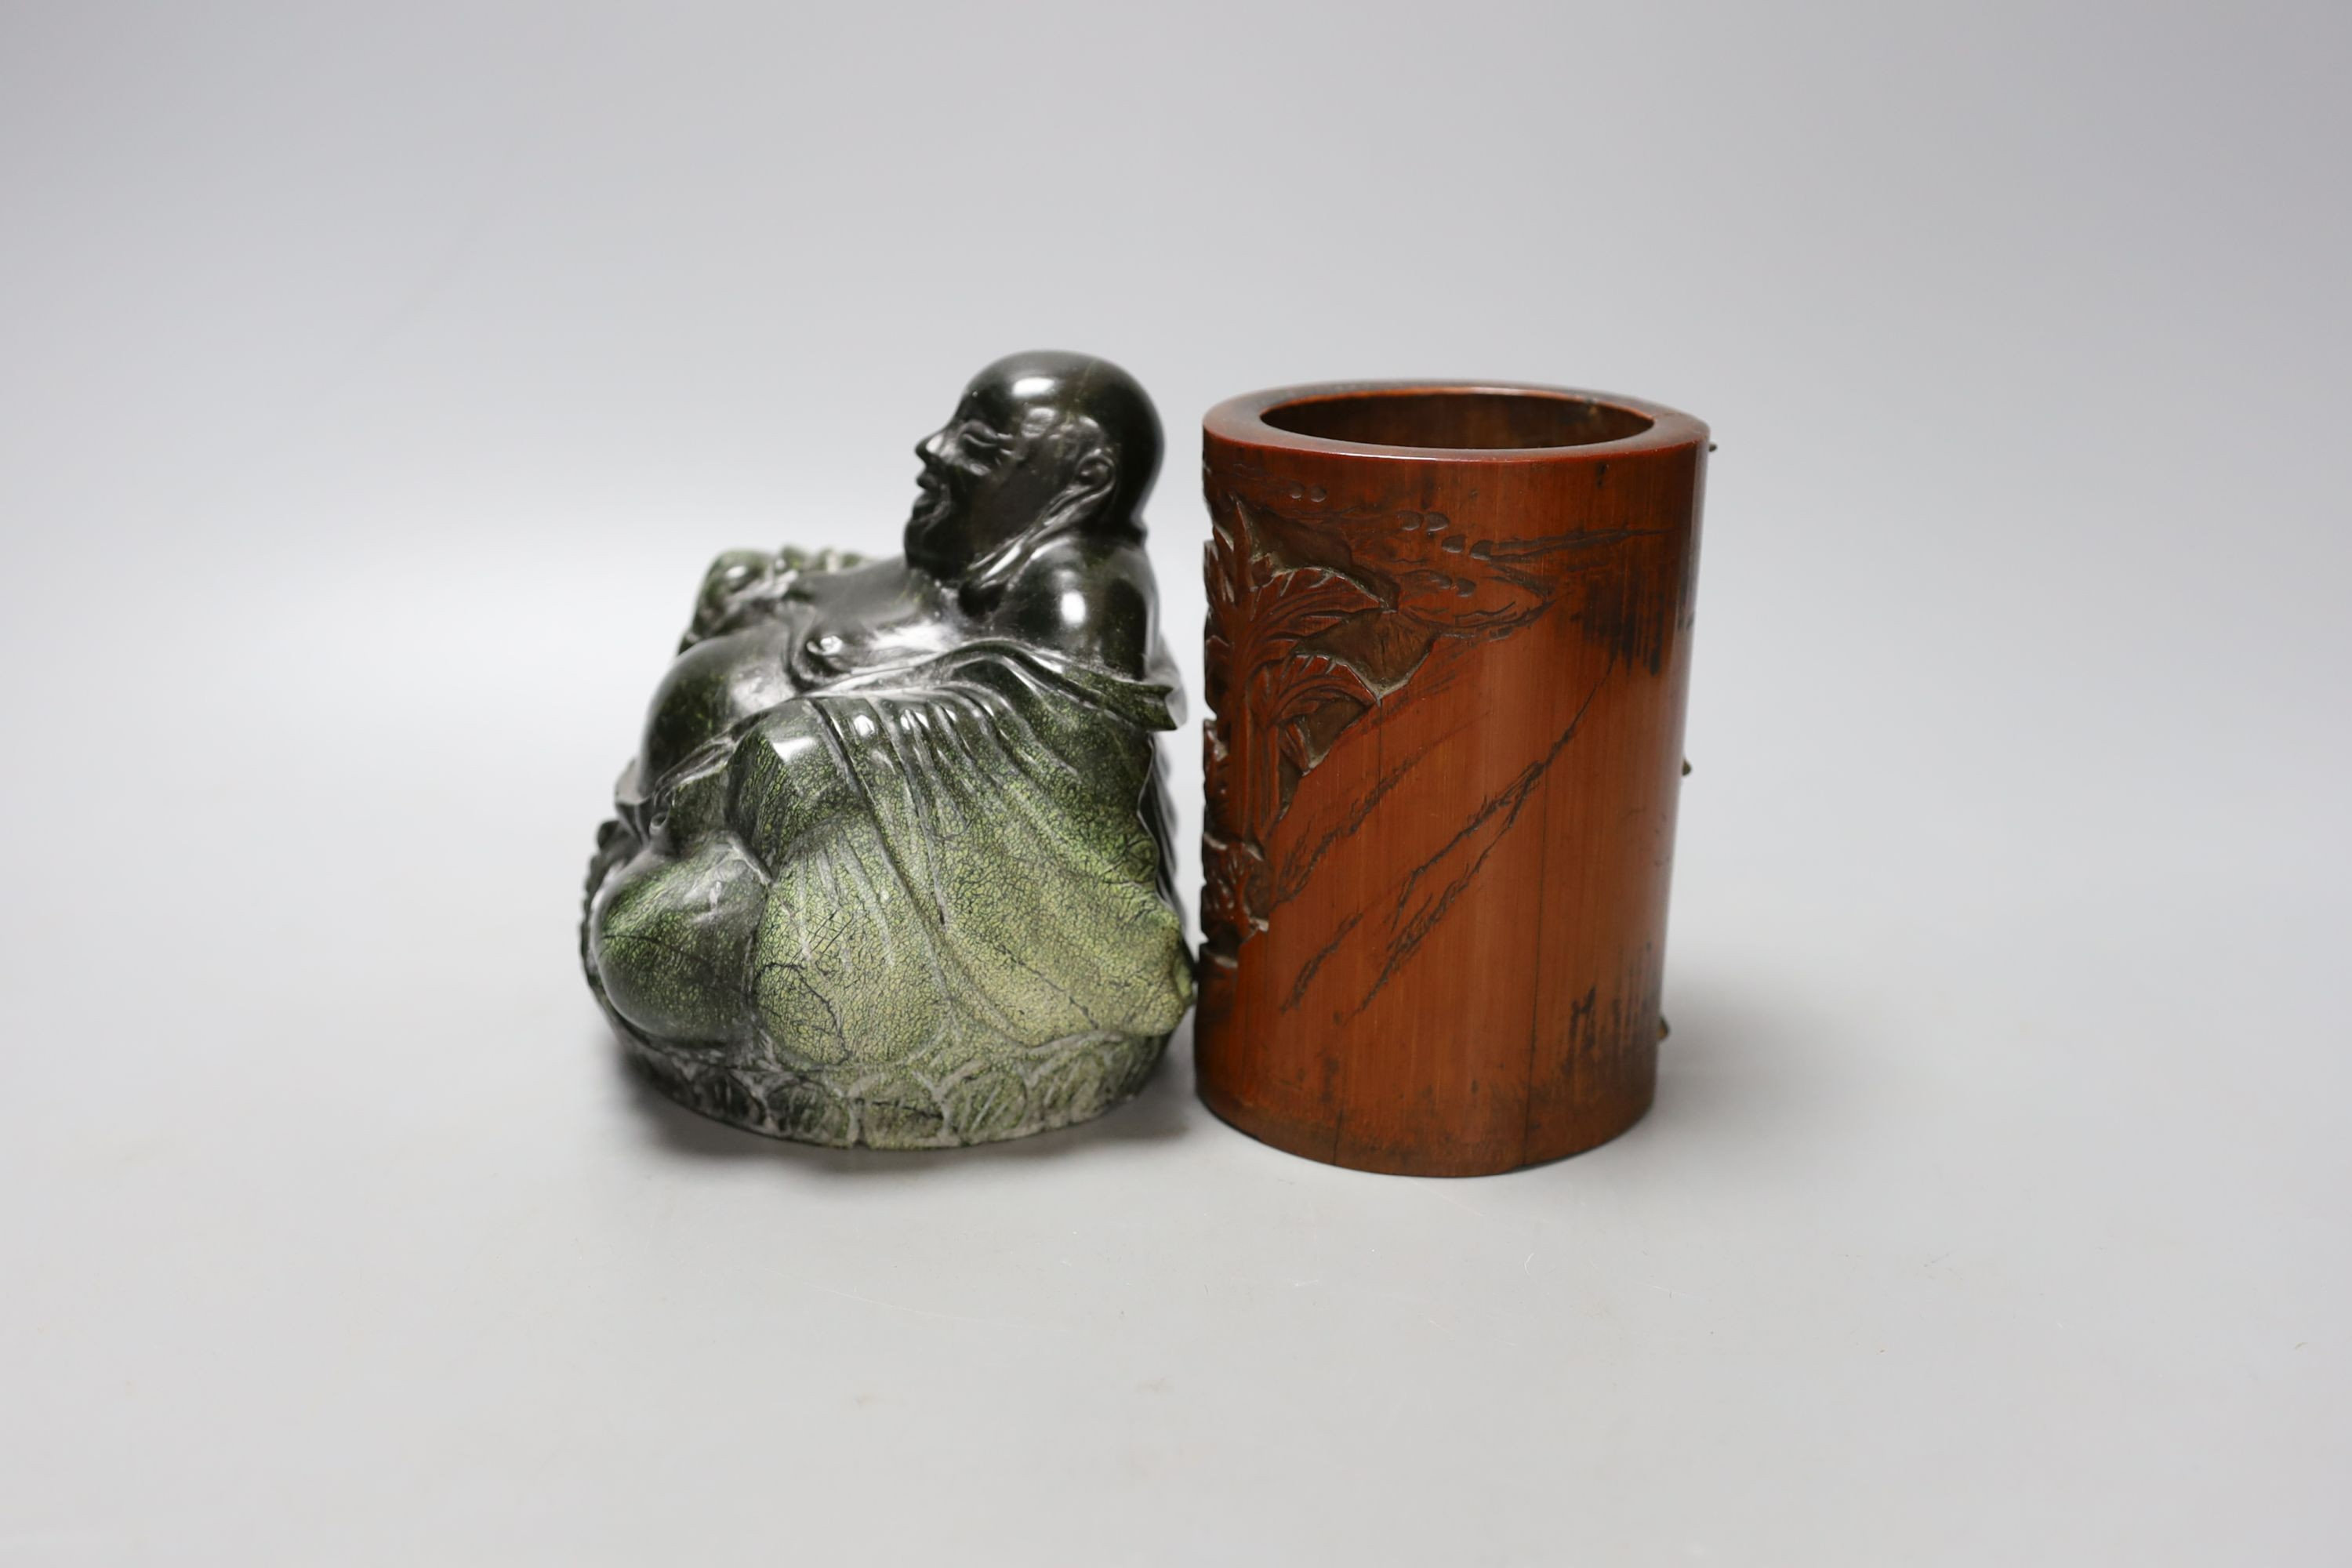 A Chinese bamboo brush pot, 13cm tall, and a green hardstone figure of Budai